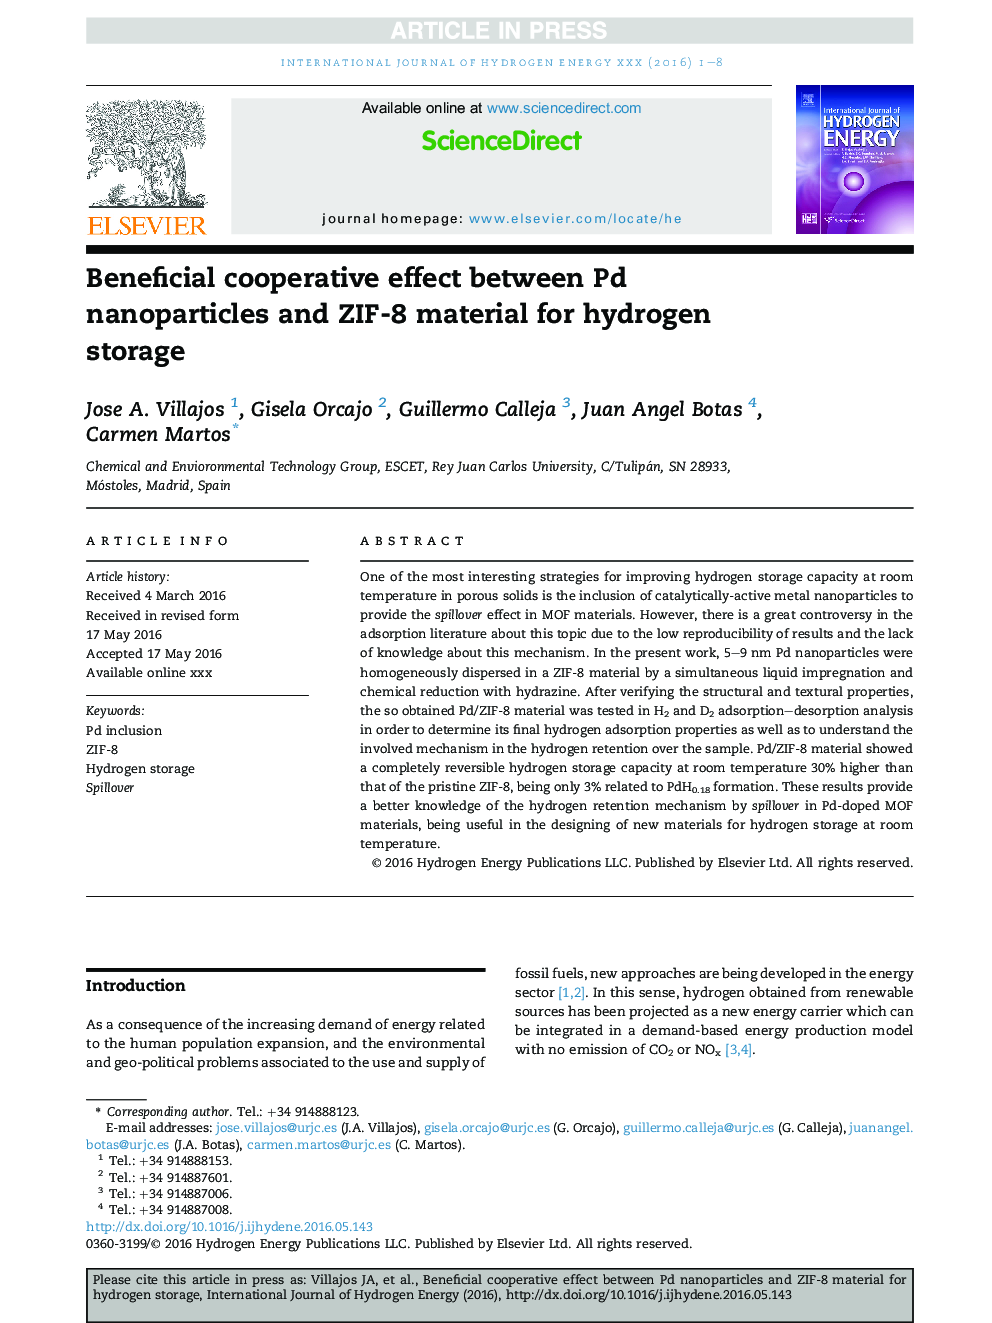 Beneficial cooperative effect between Pd nanoparticles and ZIF-8 material for hydrogen storage